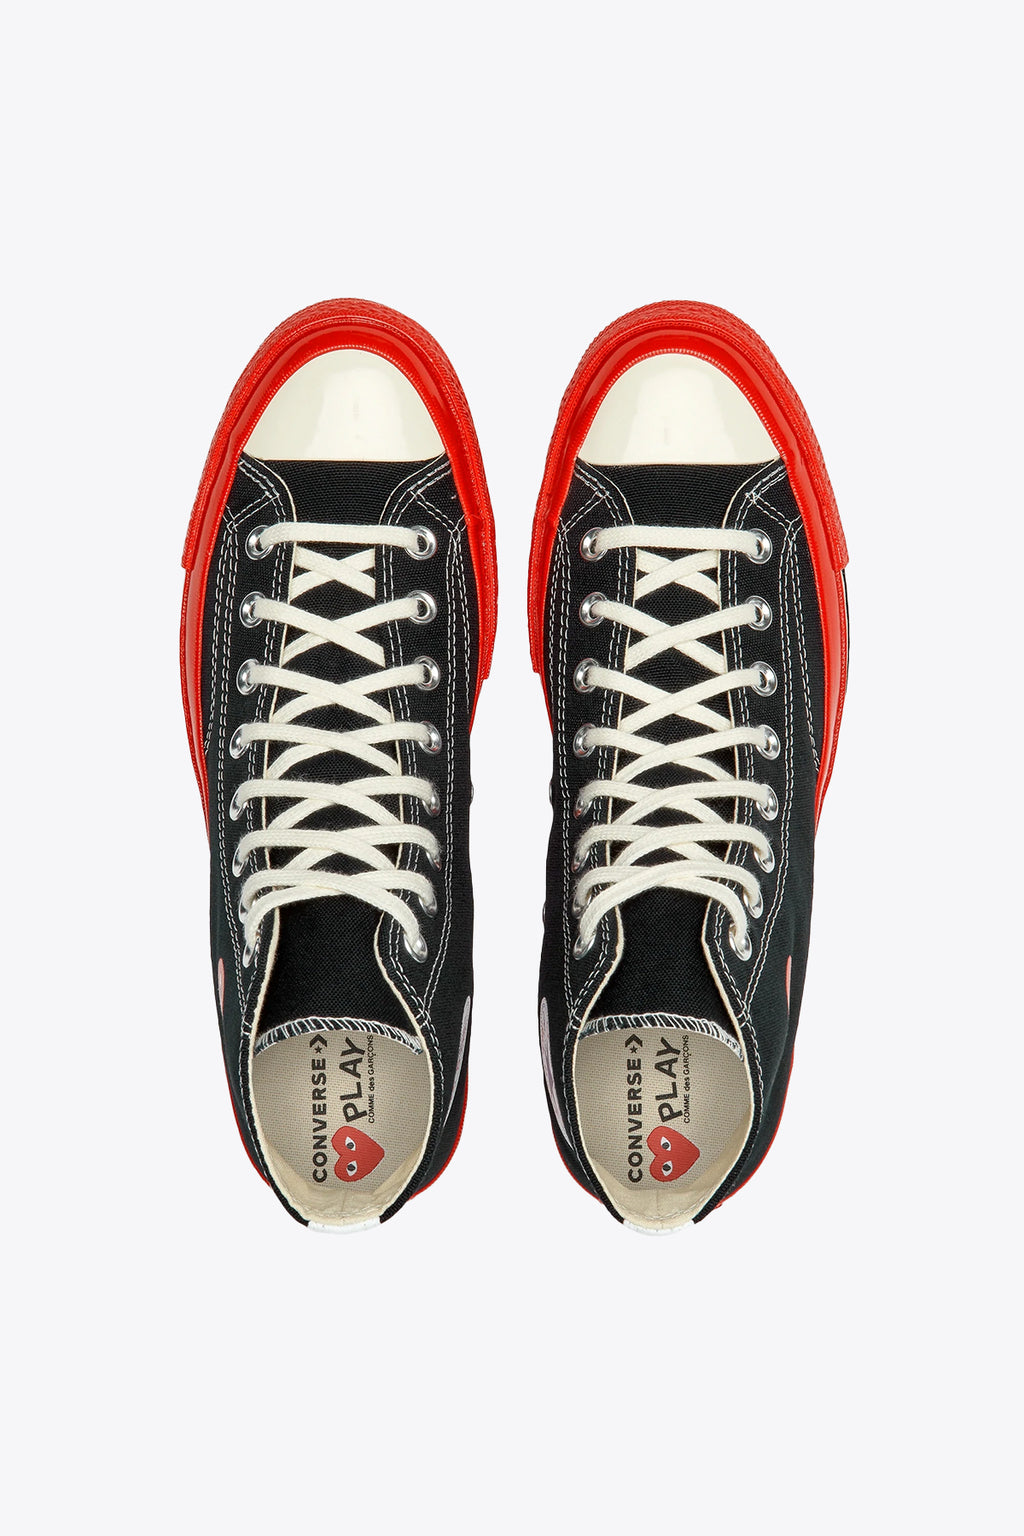 alt-image__Converse-collaboration-Chuck-Taylor-70's-black-canvas-sneaker-with-red-sole.